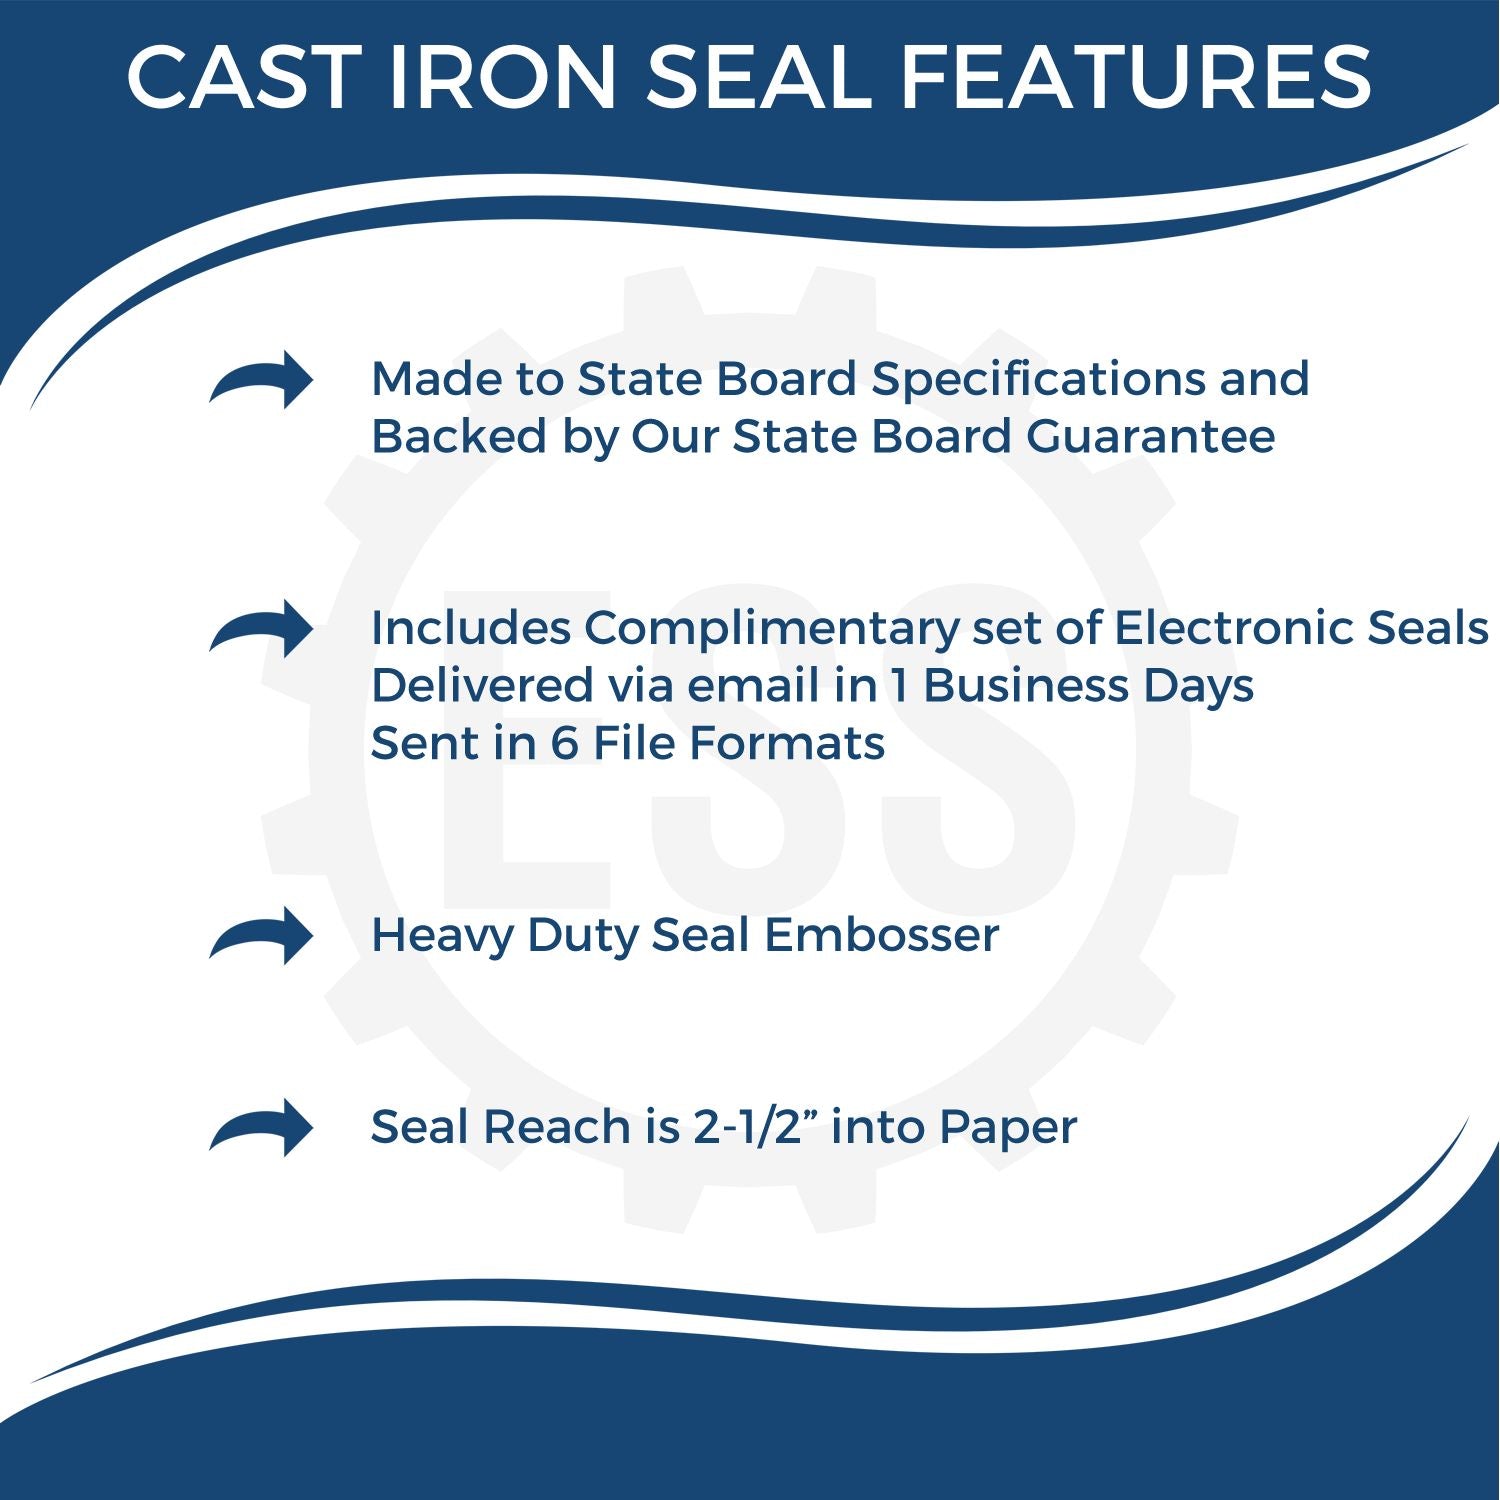 The main image for the Heavy Duty Cast Iron South Carolina Engineer Seal Embosser depicting a sample of the imprint and electronic files